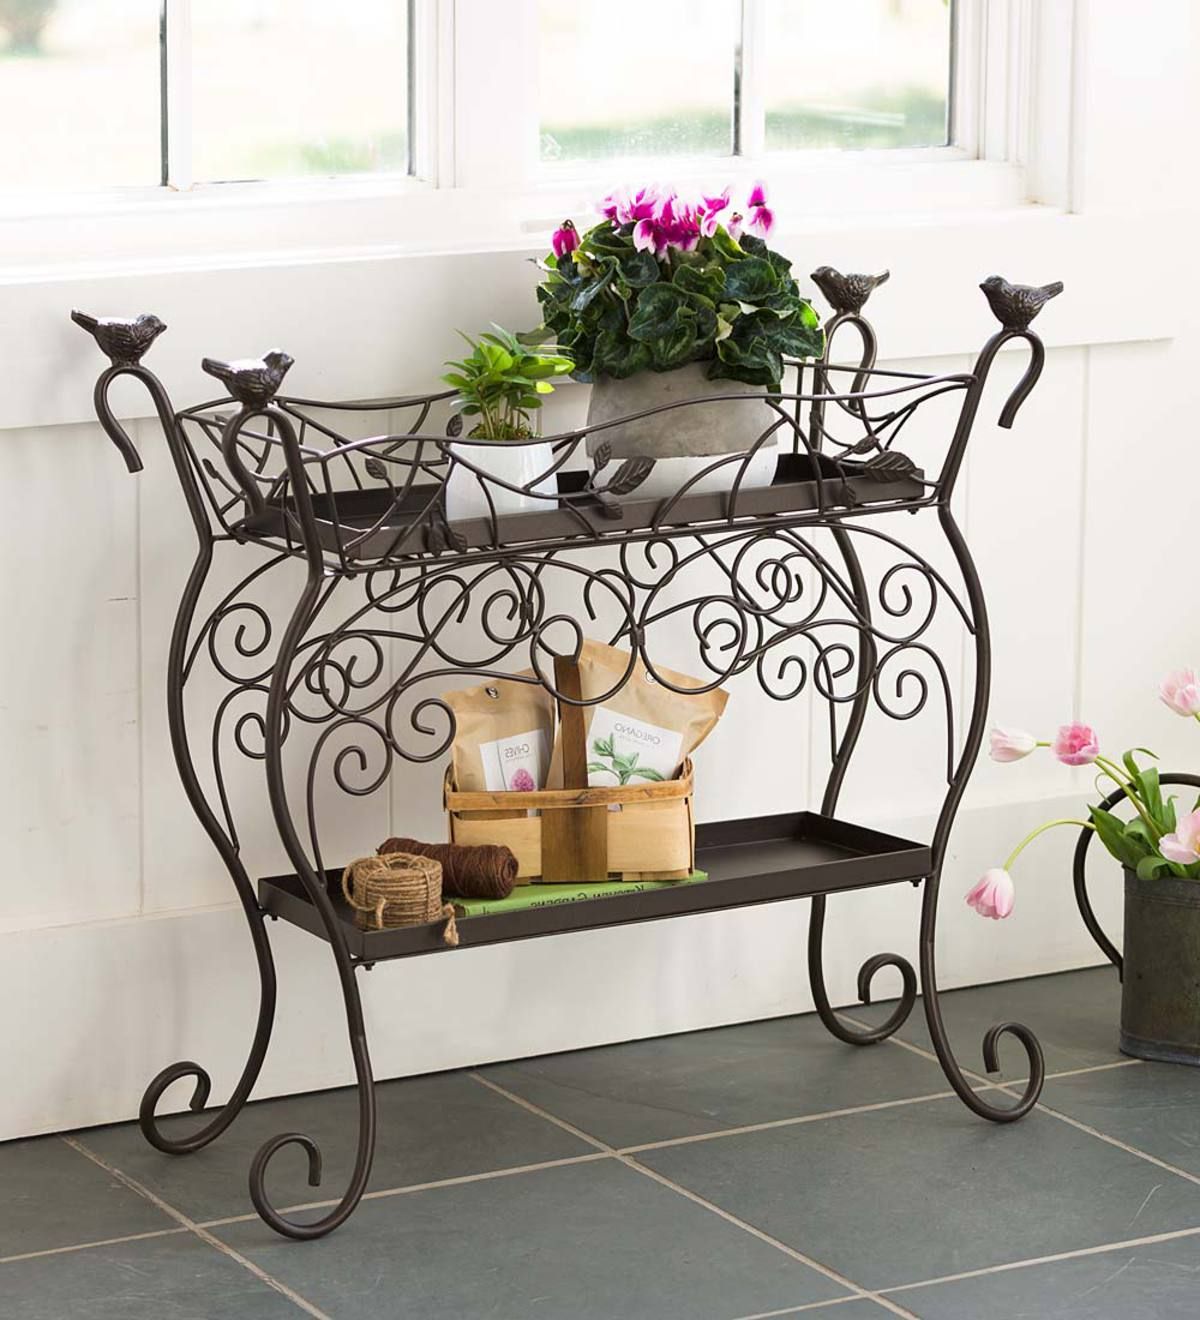 Two Shelf Wrought Iron Plant Stand | Plowhearth Inside Wrought Iron Plant Stands (View 5 of 15)